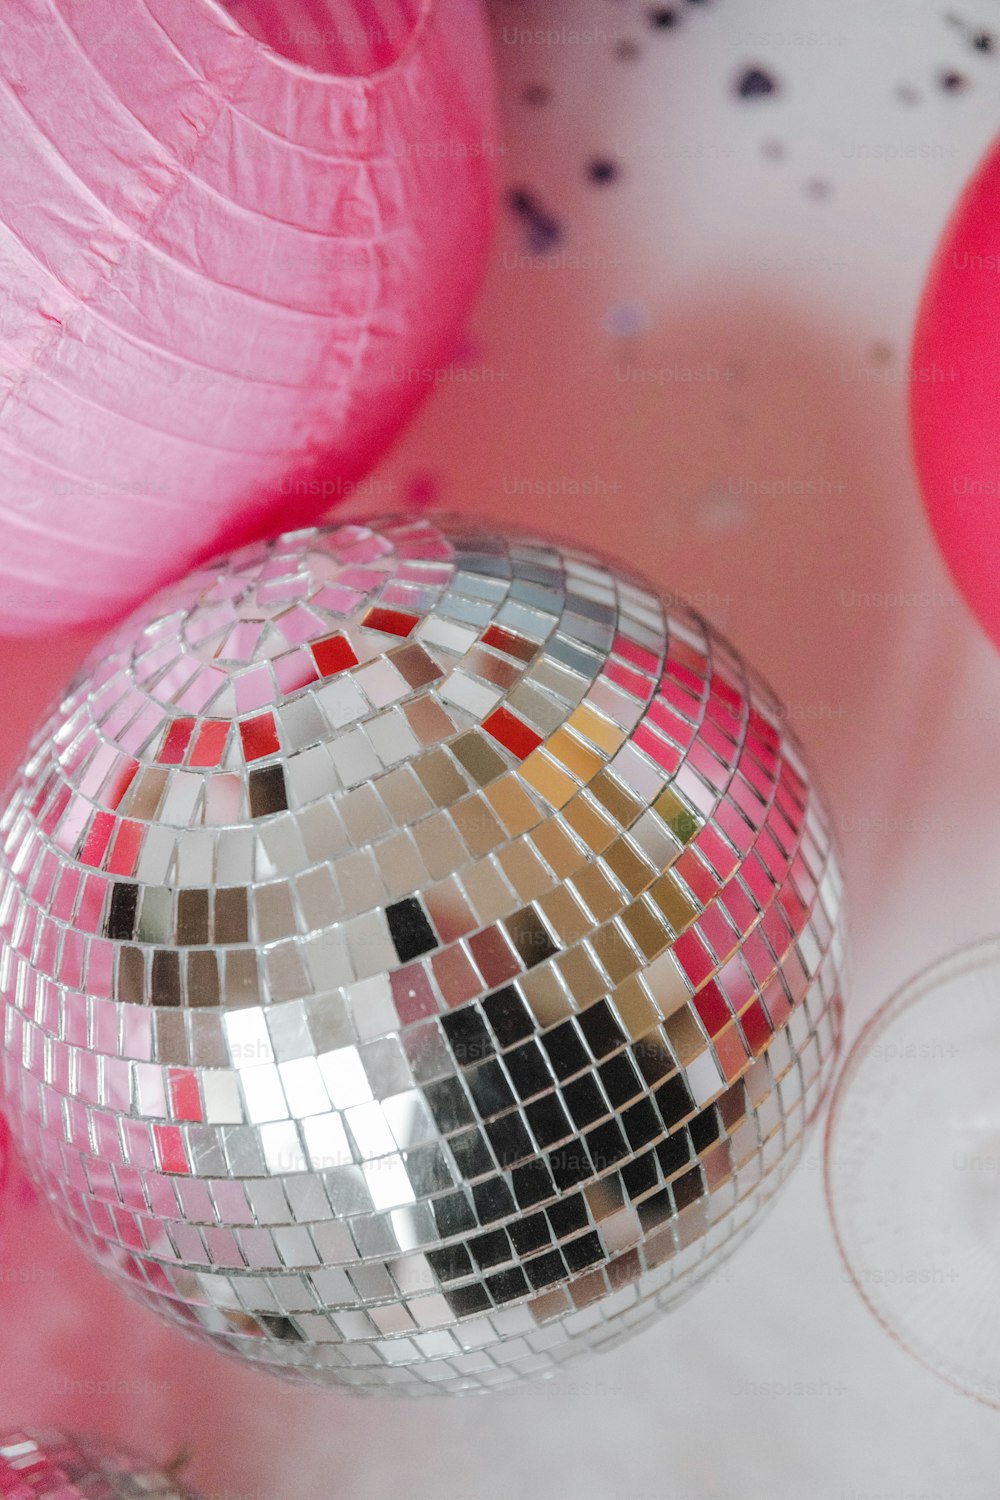 500+ Disco Pictures [HD] | Download Free Images on Unsplash